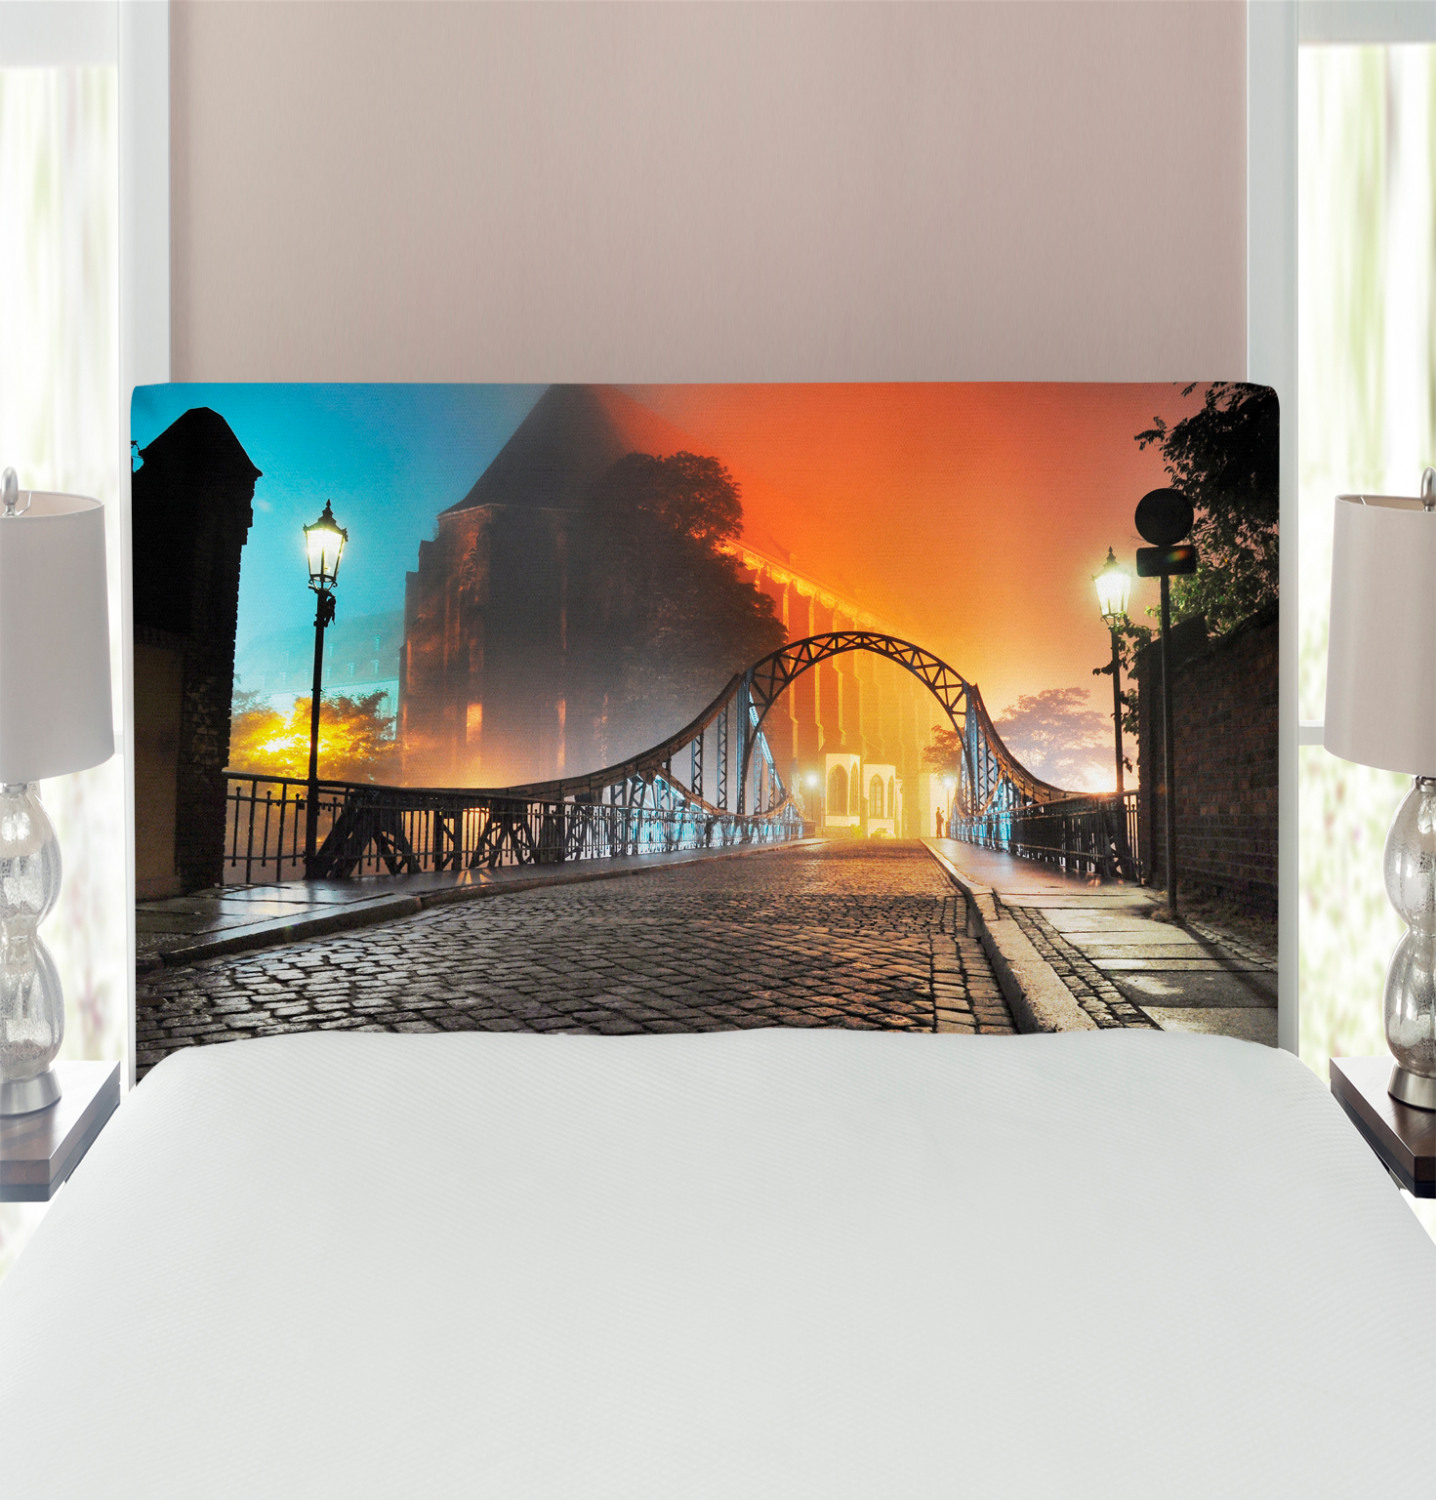 Landscape Headboard, Modern City Bridge at Night with Sightseeing Urban Theme Landscape, Upholstered Decorative Metal Bed Headboard with Memory Foam, Twin Size, Grey Orange, by Ambesonne - image 1 of 4